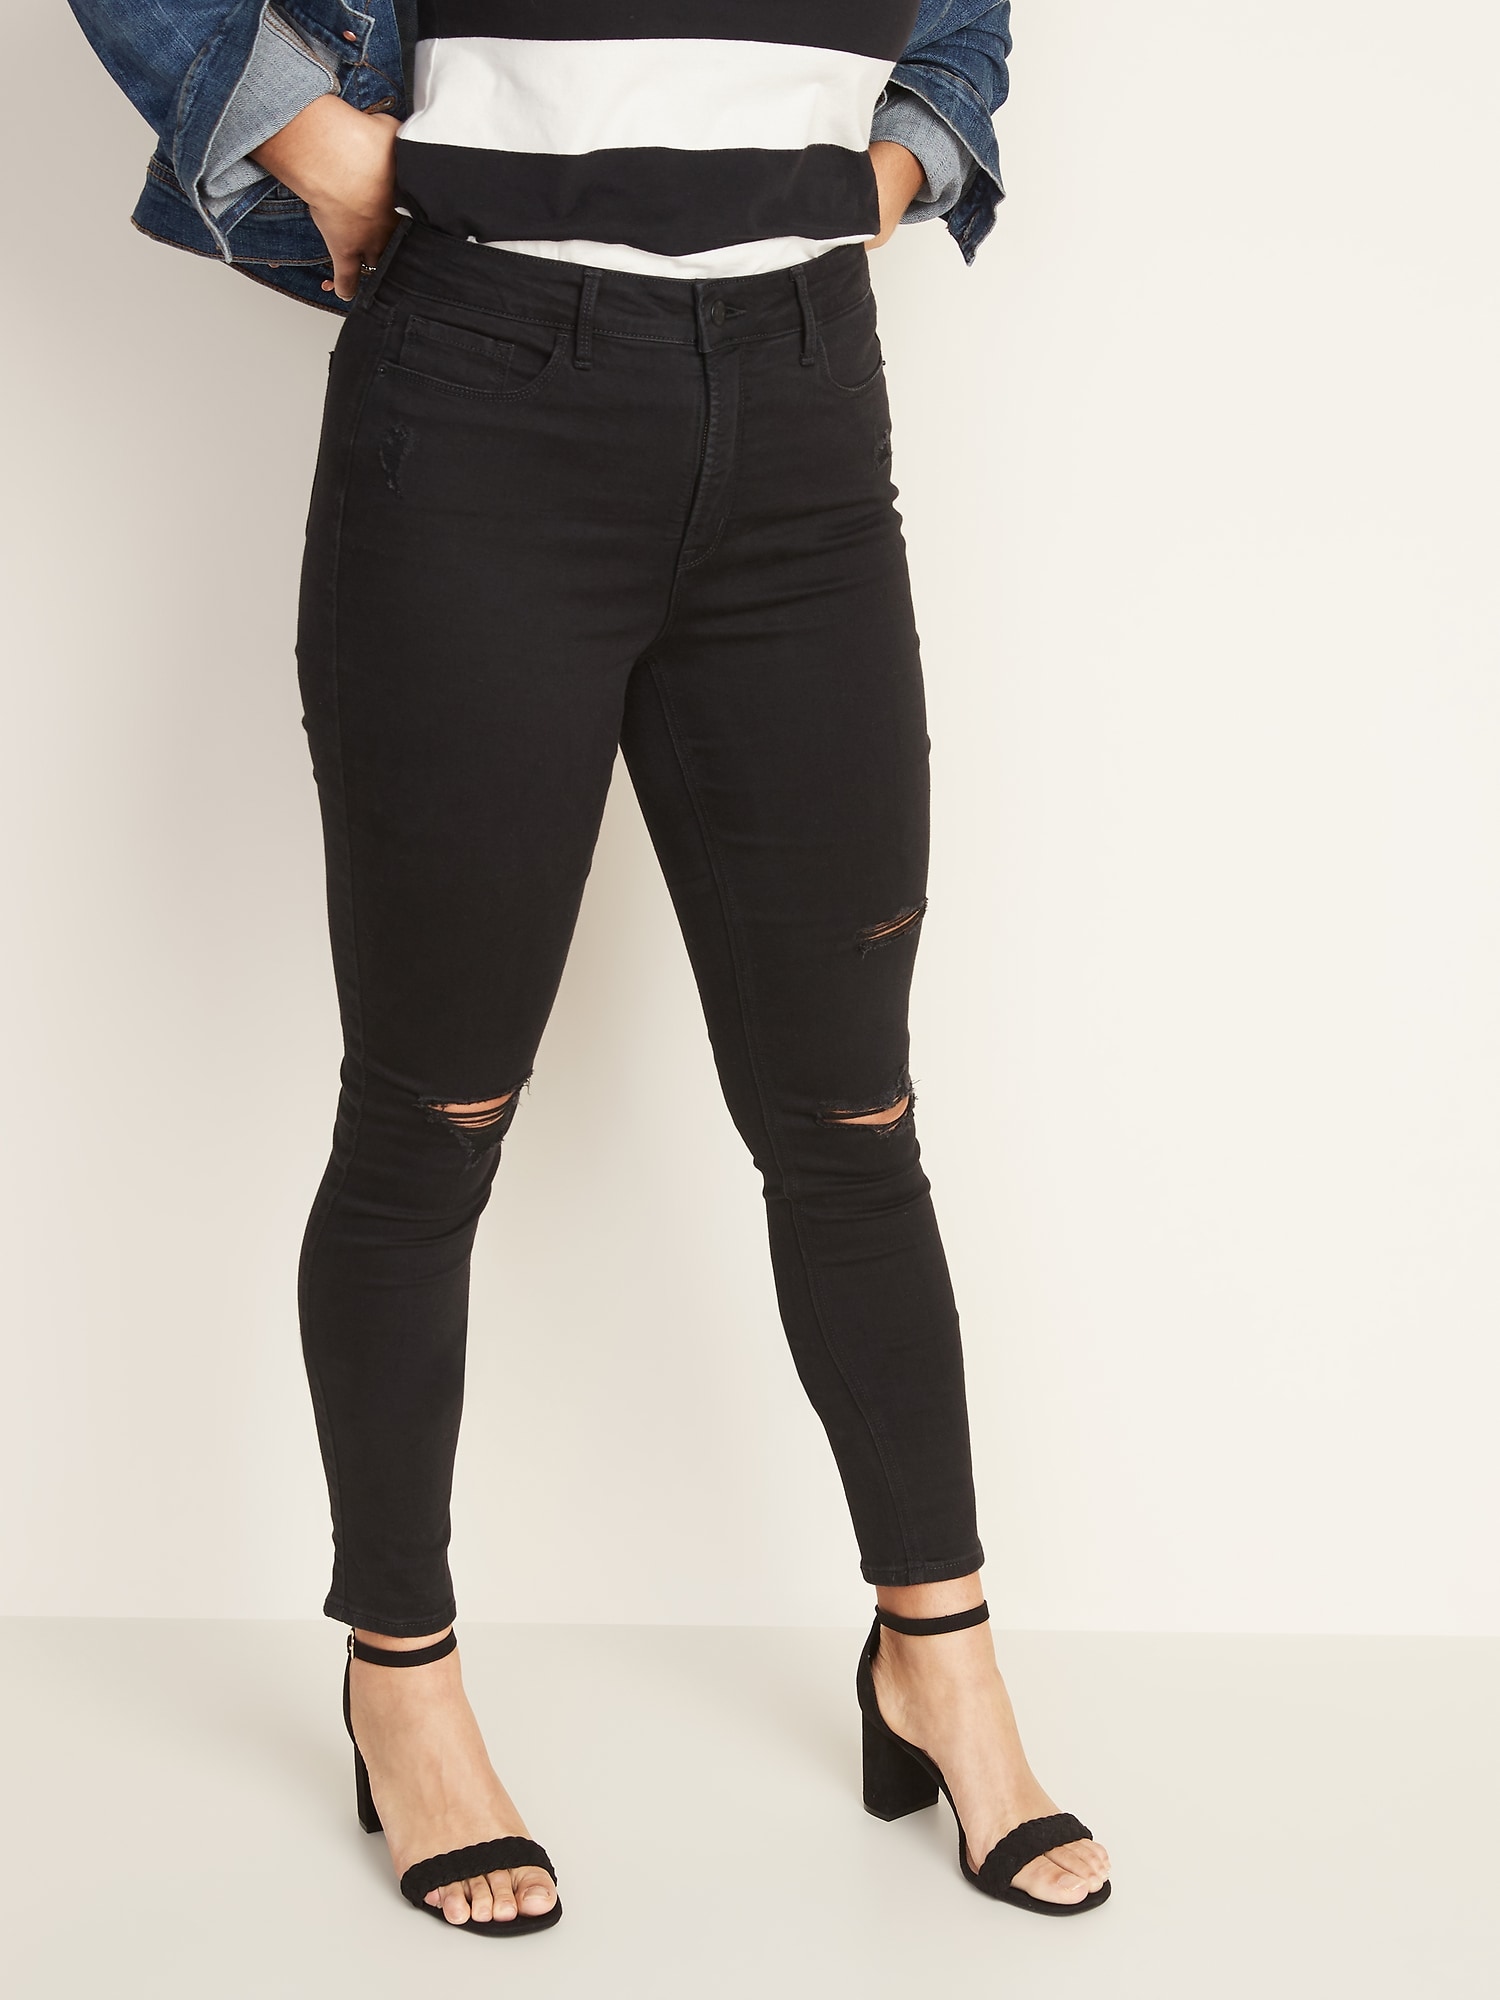 black high waisted super skinny ripped jeans